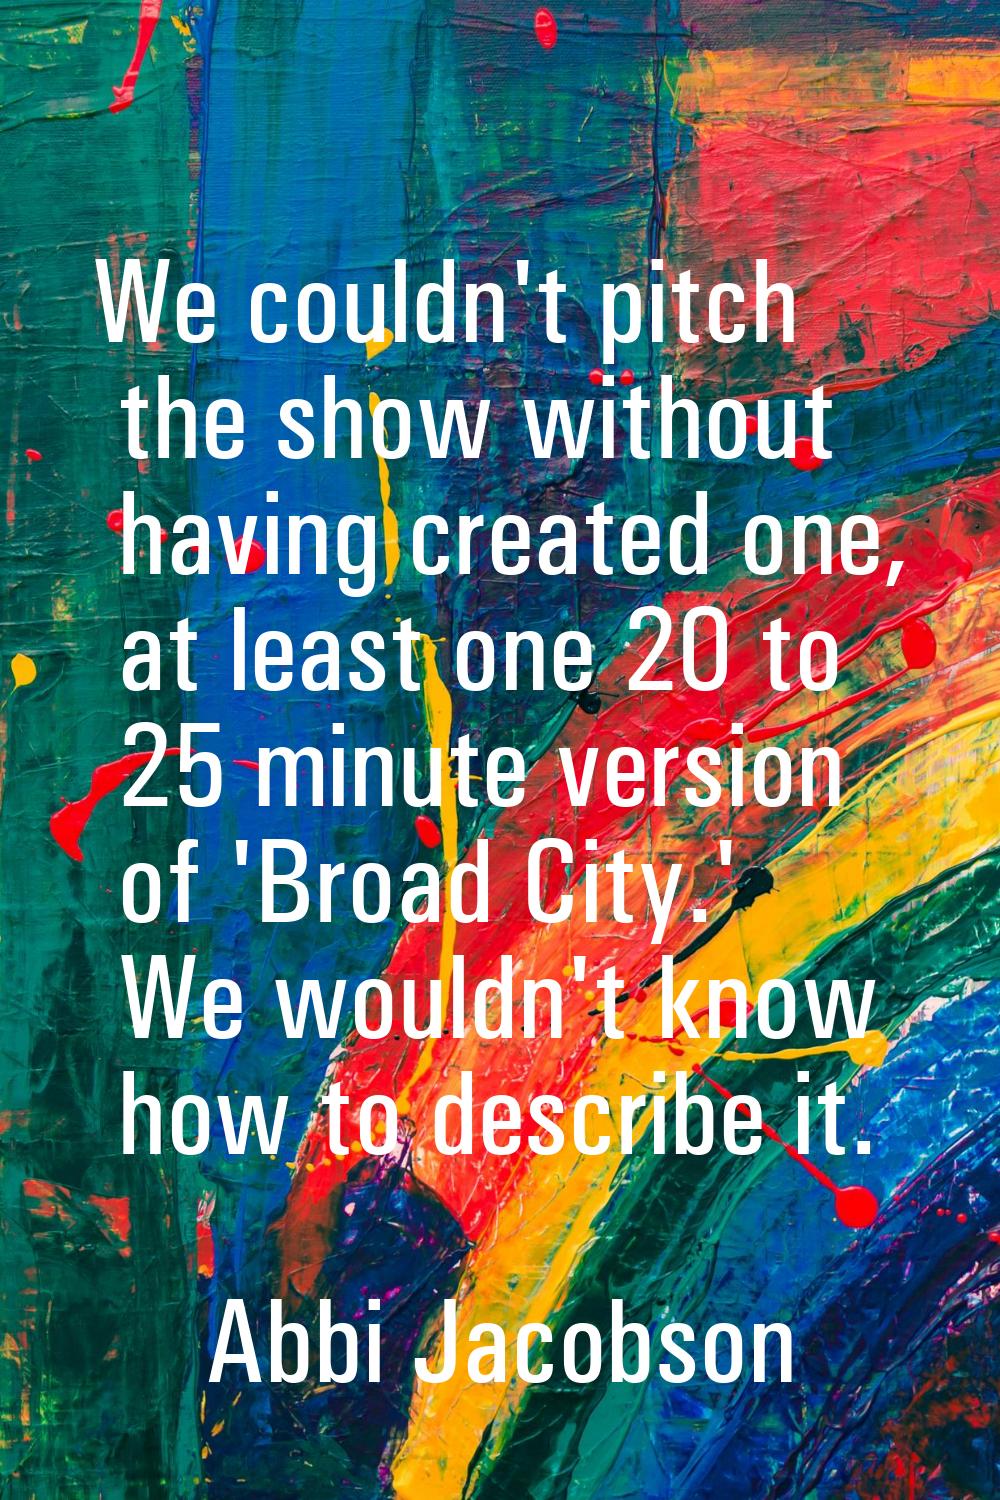 We couldn't pitch the show without having created one, at least one 20 to 25 minute version of 'Bro